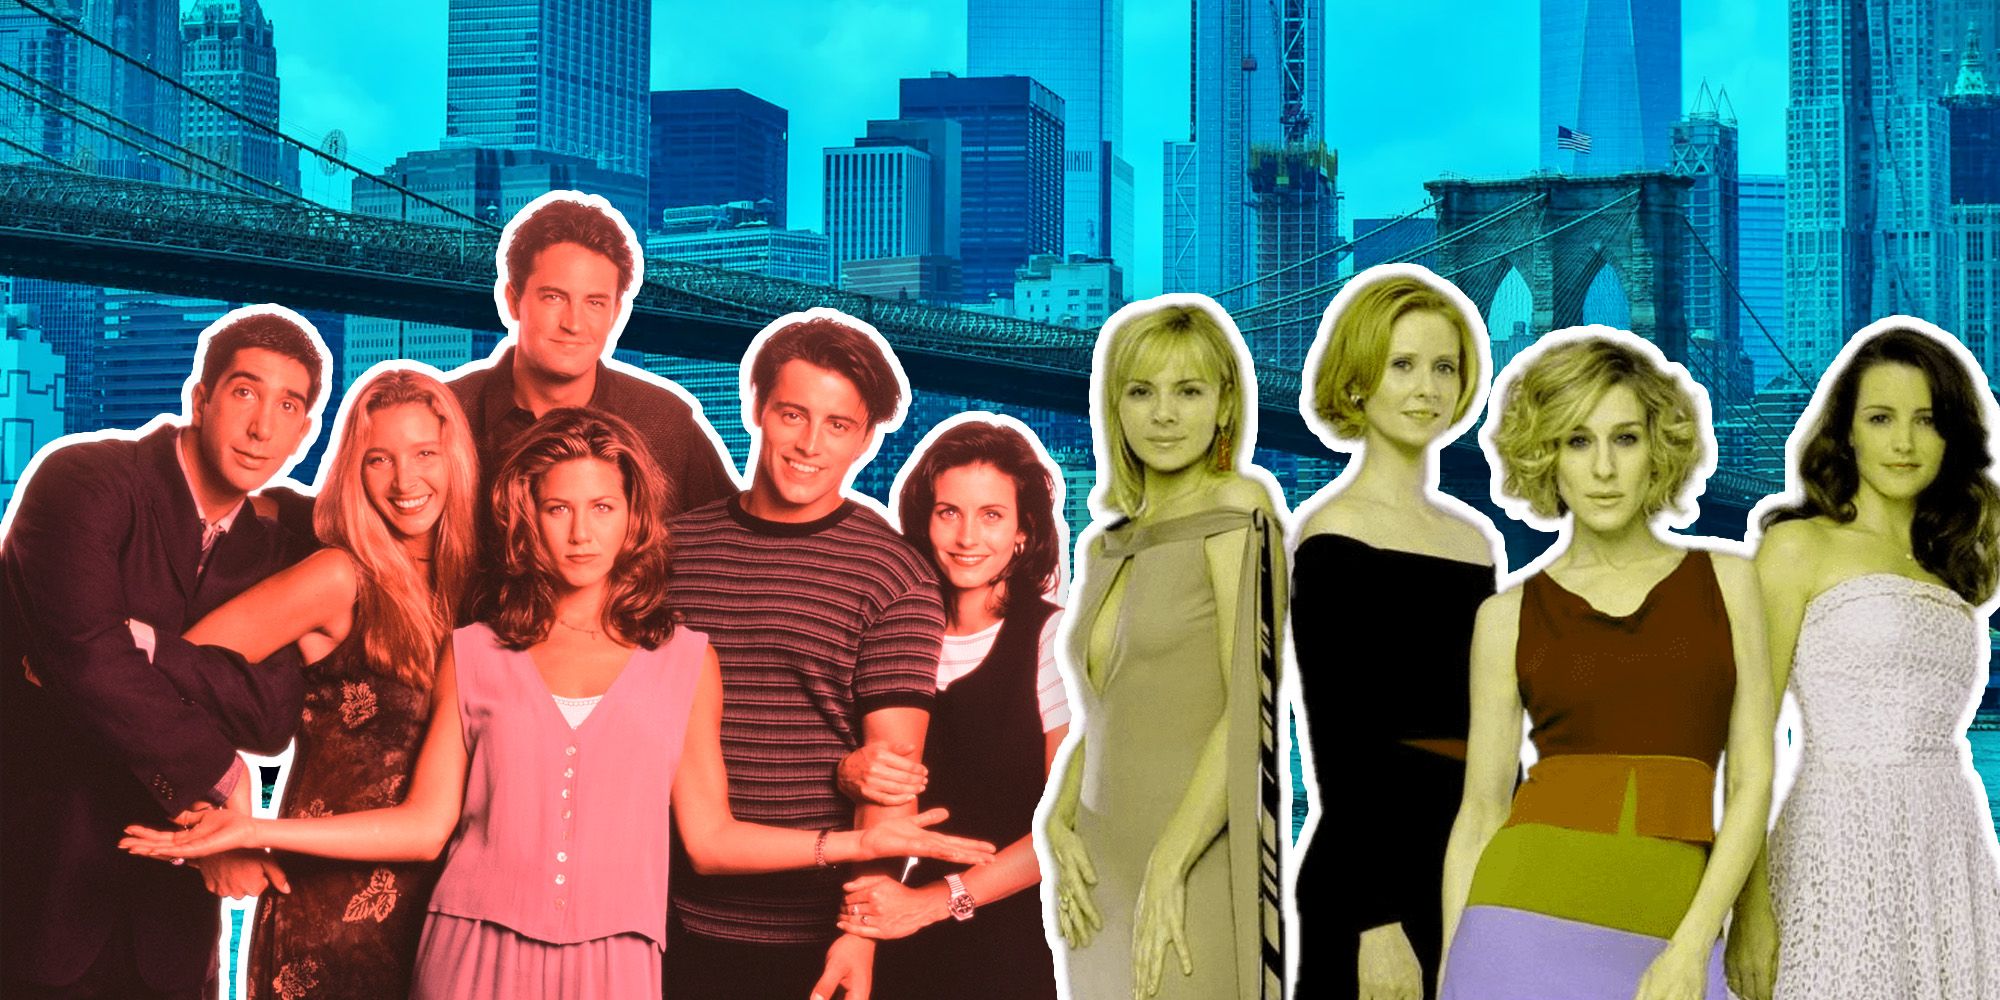 The cast of Friends next to the cast of Sex and the City in front of the New York skyline 